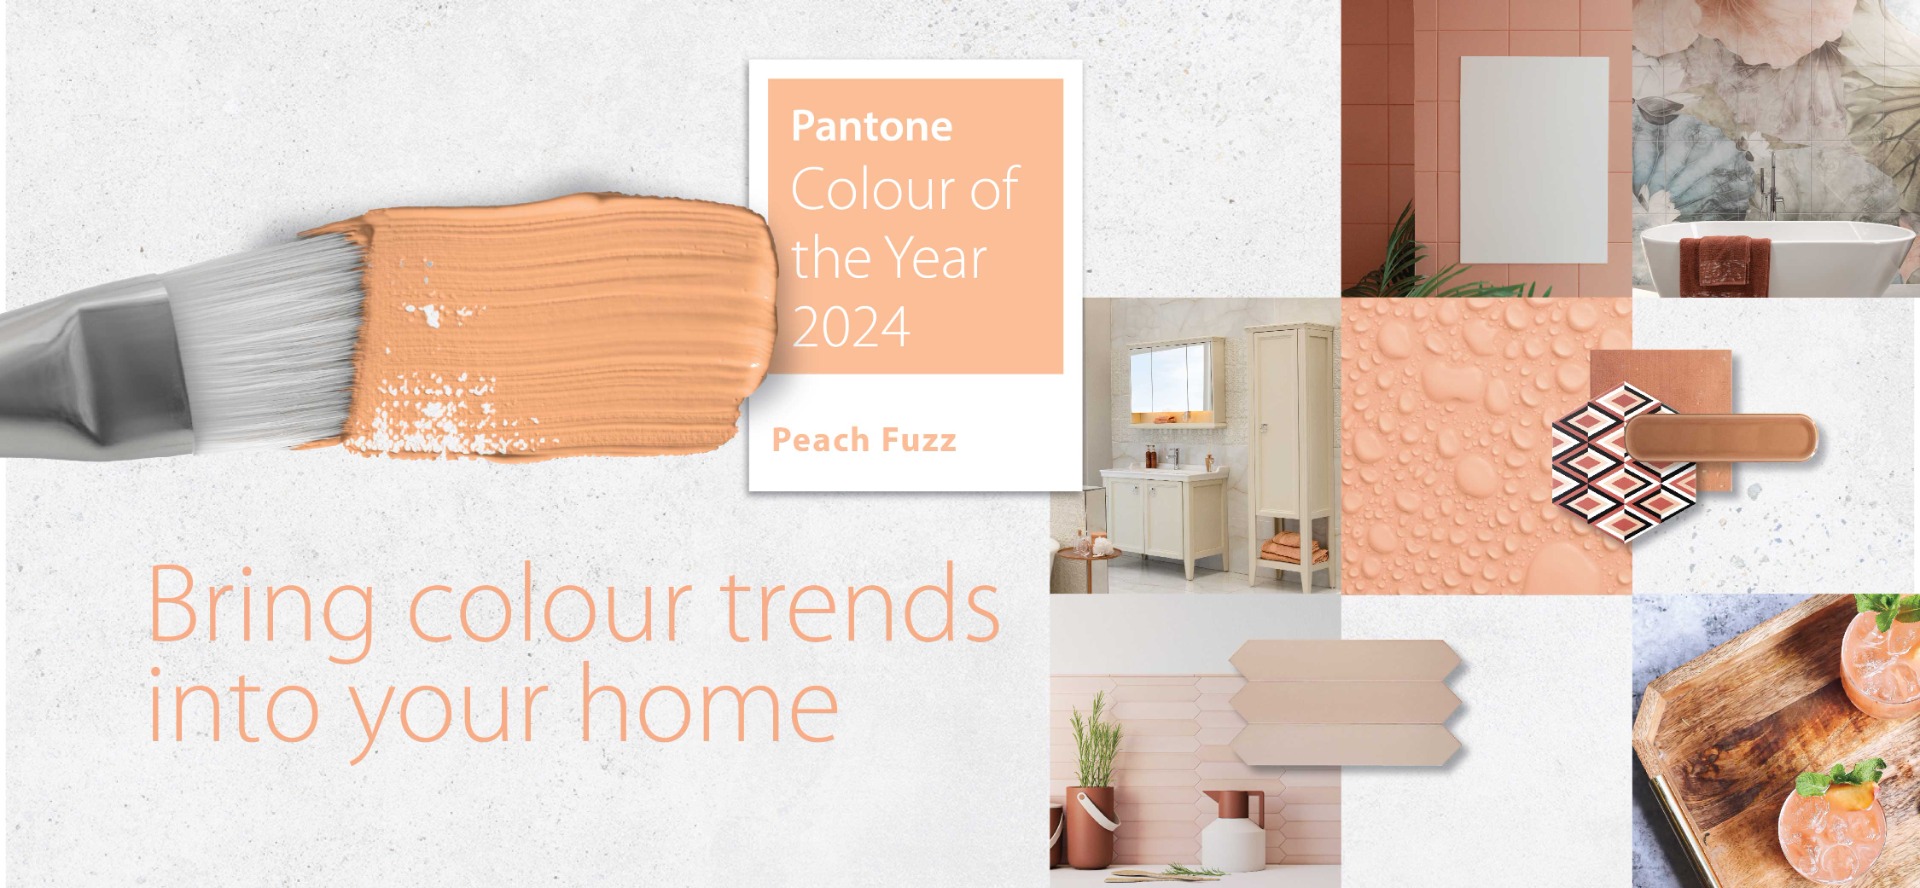 Bring Colour Trends into Your Home